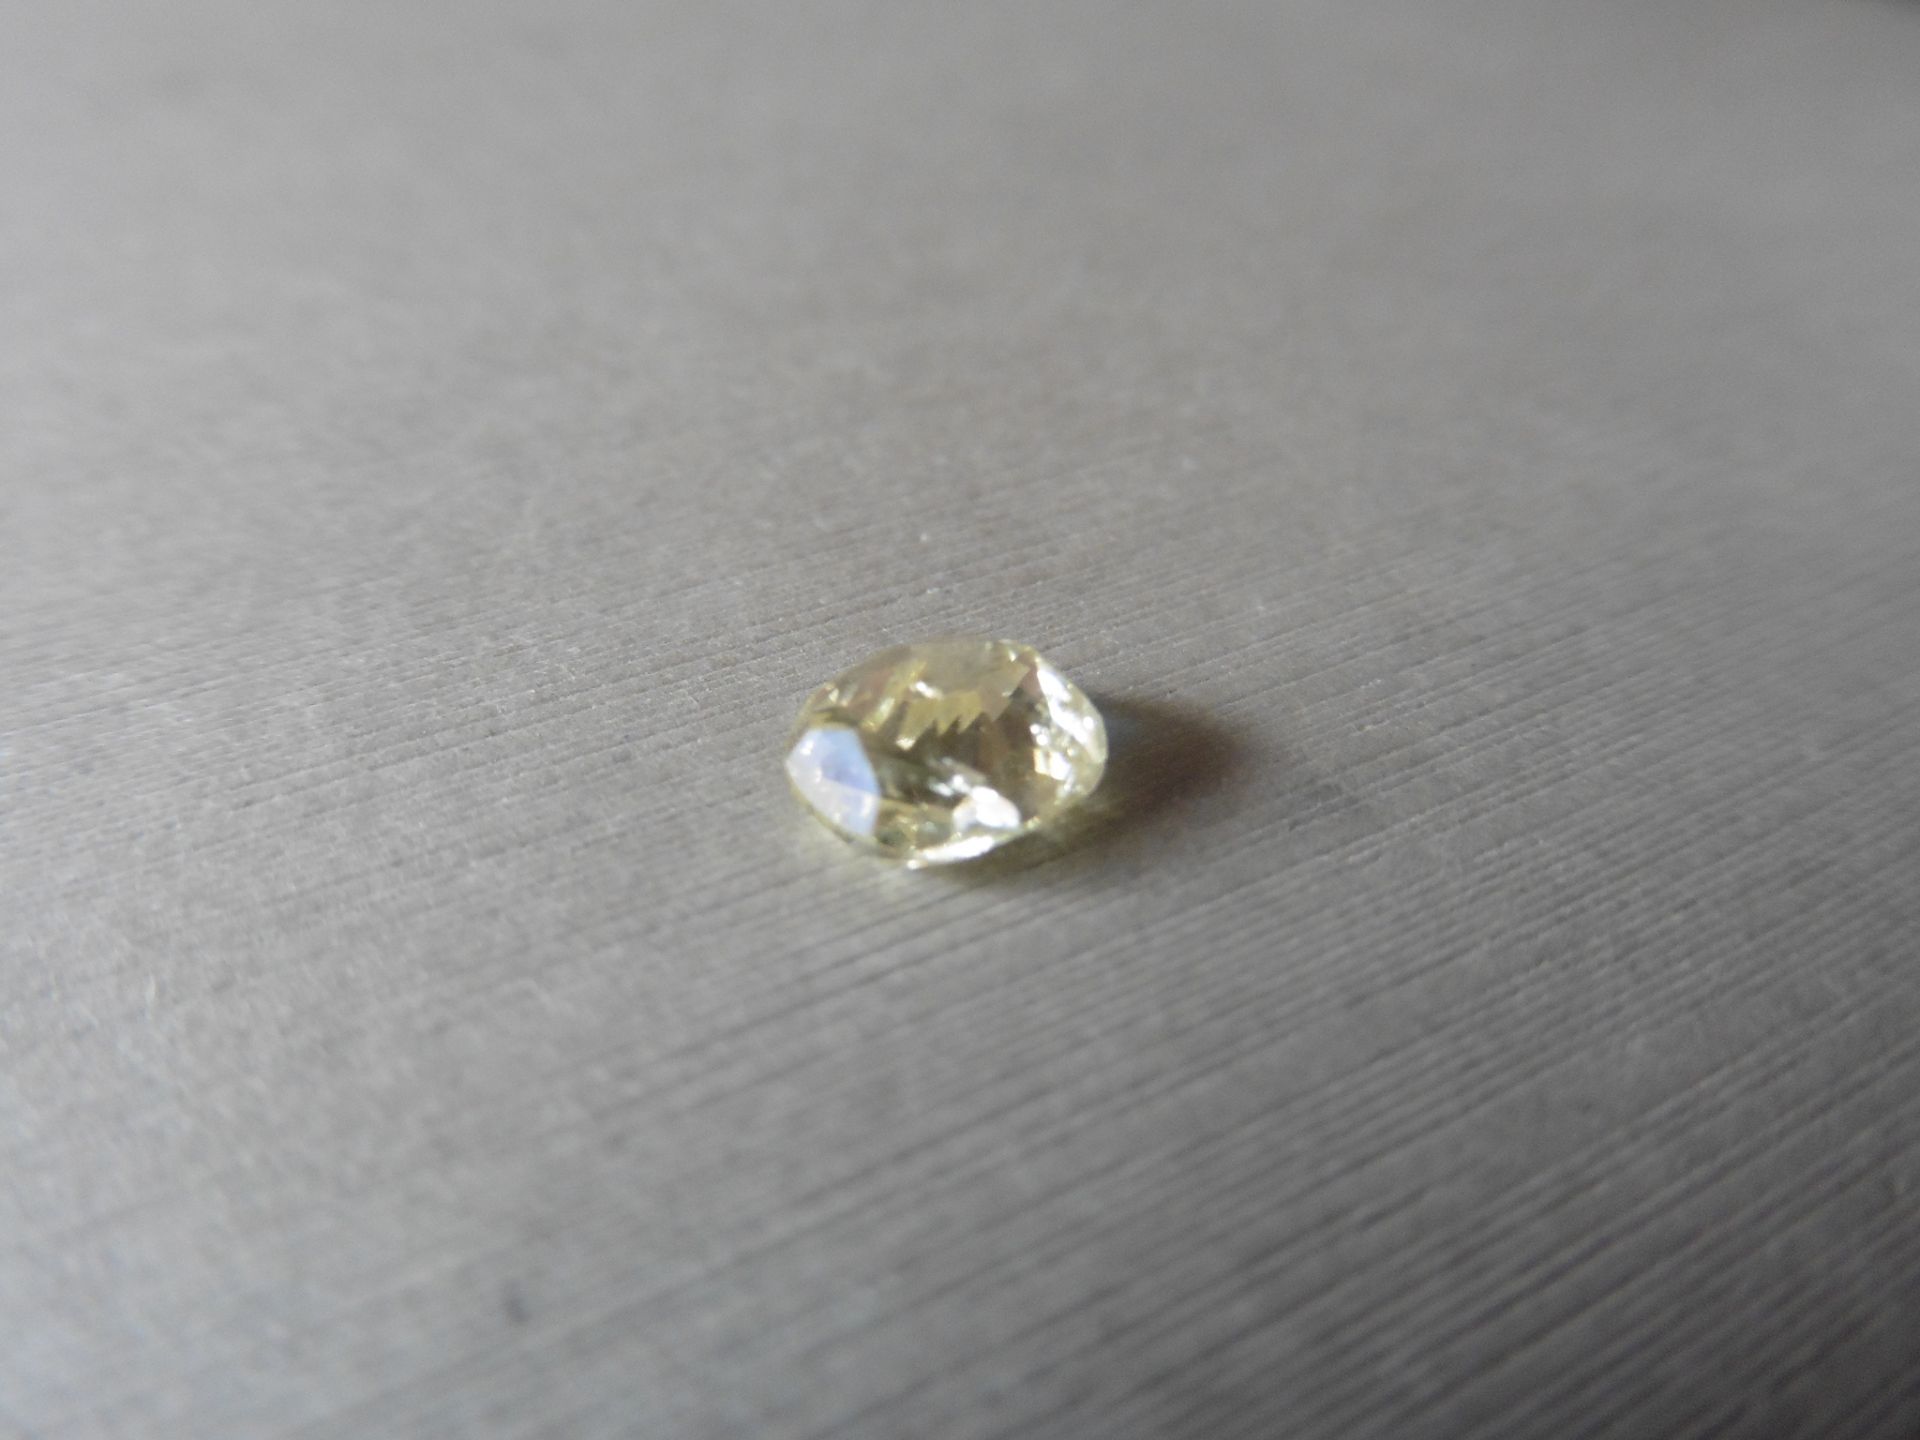 1.57ct loose cushion cut diamond. Fancy yellow colour and I1 clarity. 7.13 x 6.22 x 4.09mm. - Image 2 of 4